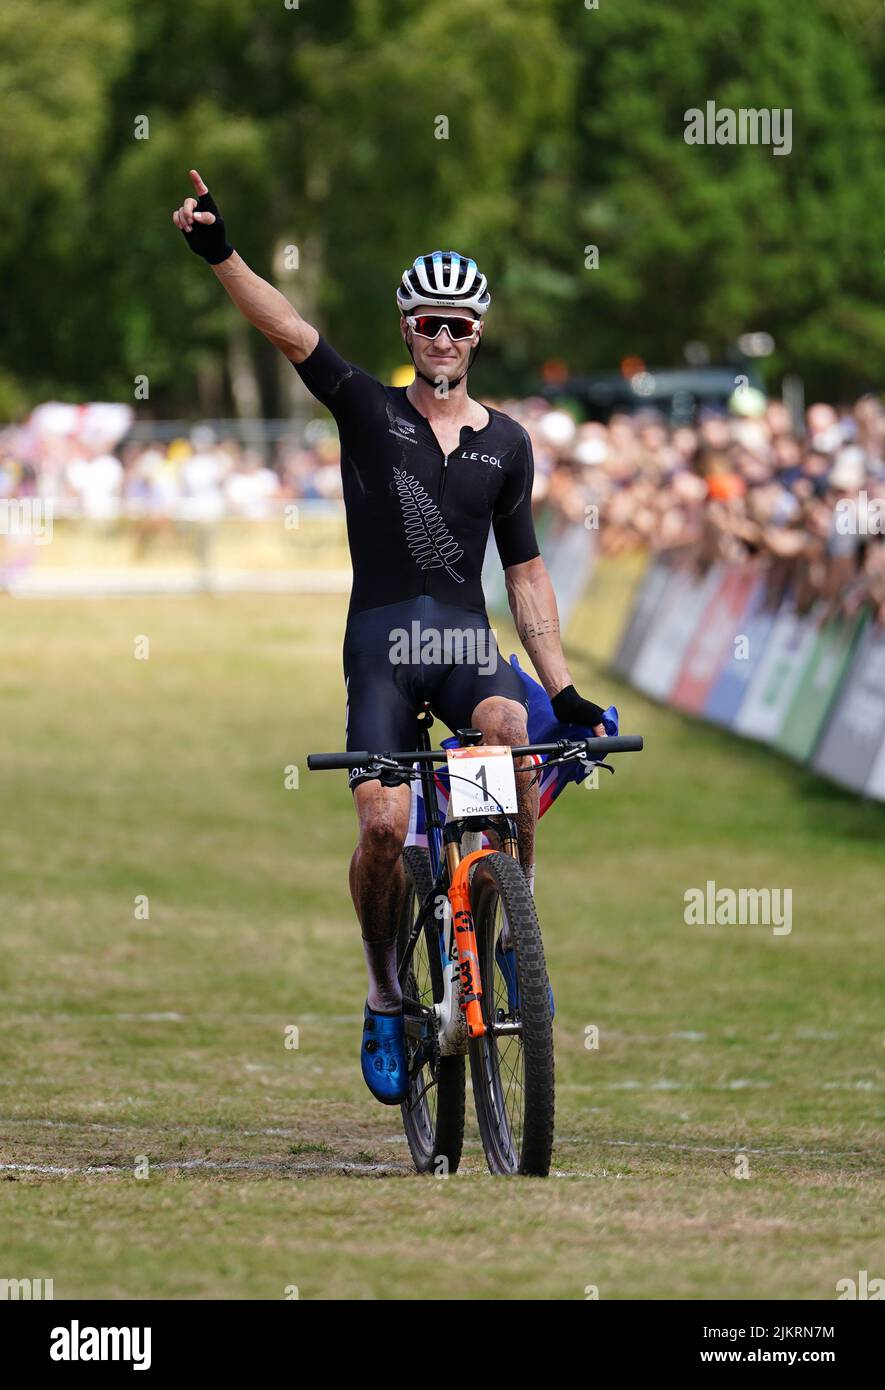 New Zealand's Samuel Gaze wins gold in Men's Cross-country final at Cannock Chase on day six of the 2022 Commonwealth Games. Picture date: Wednesday August 3, 2022. Stock Photo